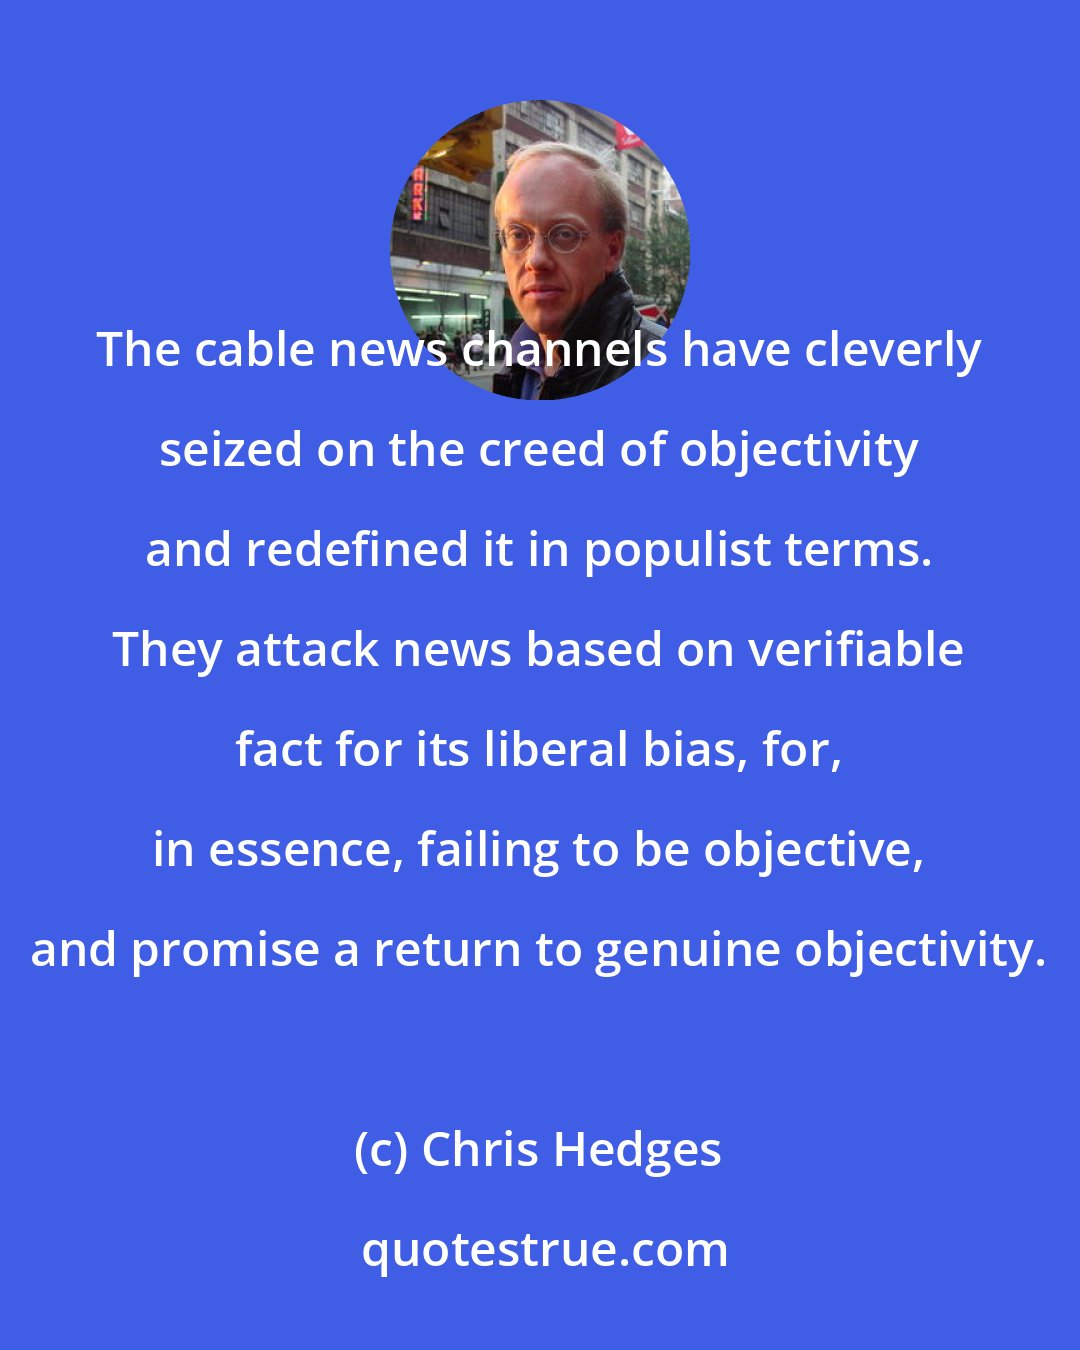 Chris Hedges: The cable news channels have cleverly seized on the creed of objectivity and redefined it in populist terms. They attack news based on verifiable fact for its liberal bias, for, in essence, failing to be objective, and promise a return to genuine objectivity.